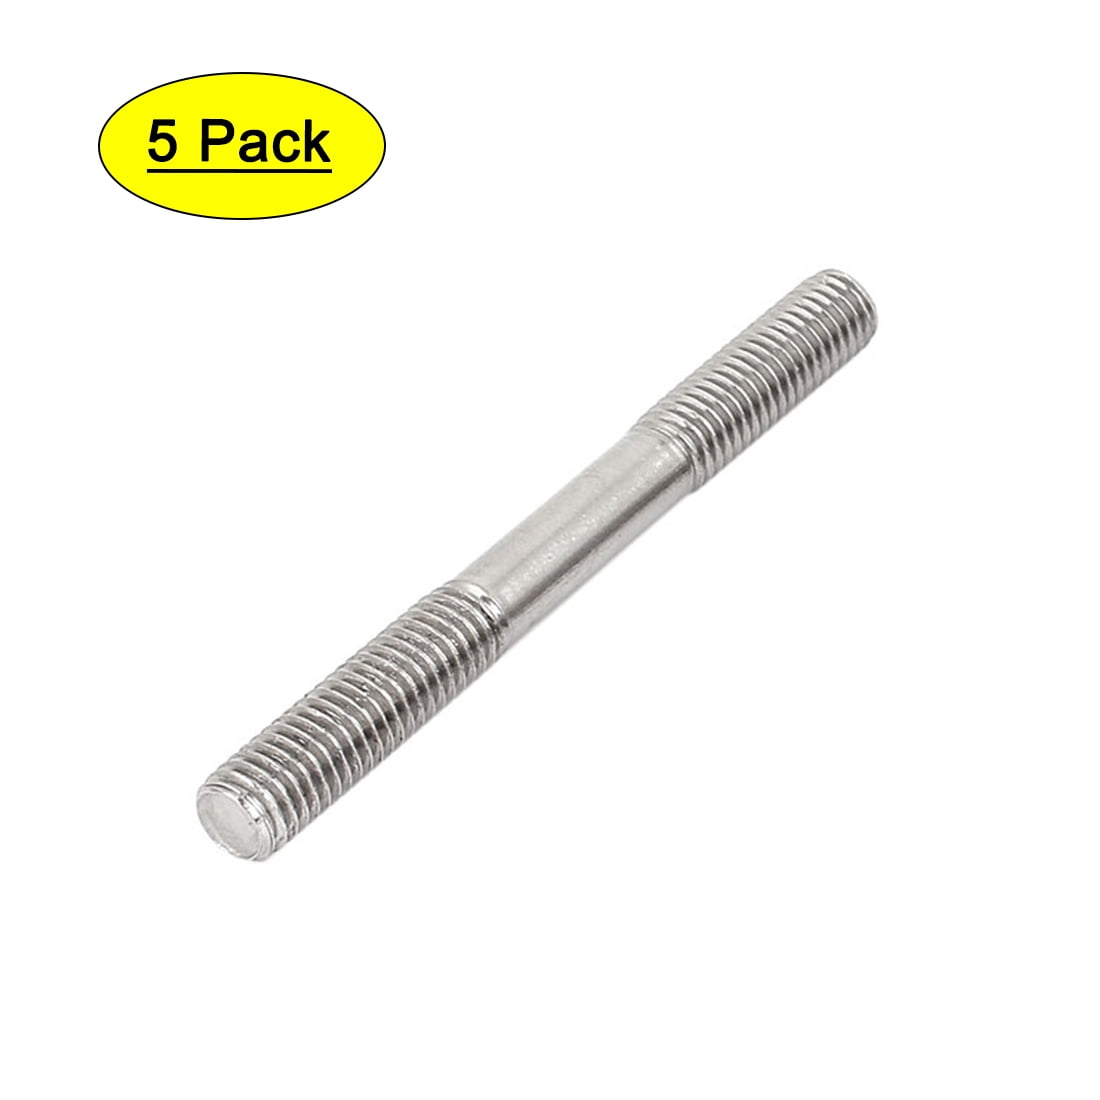 50 pcs Screw-in End 1.0 X Diameter M16-2.0 X 60mm Double-Ended Stud with Plain Center A2 Stainless Steel Metric DIN 938 